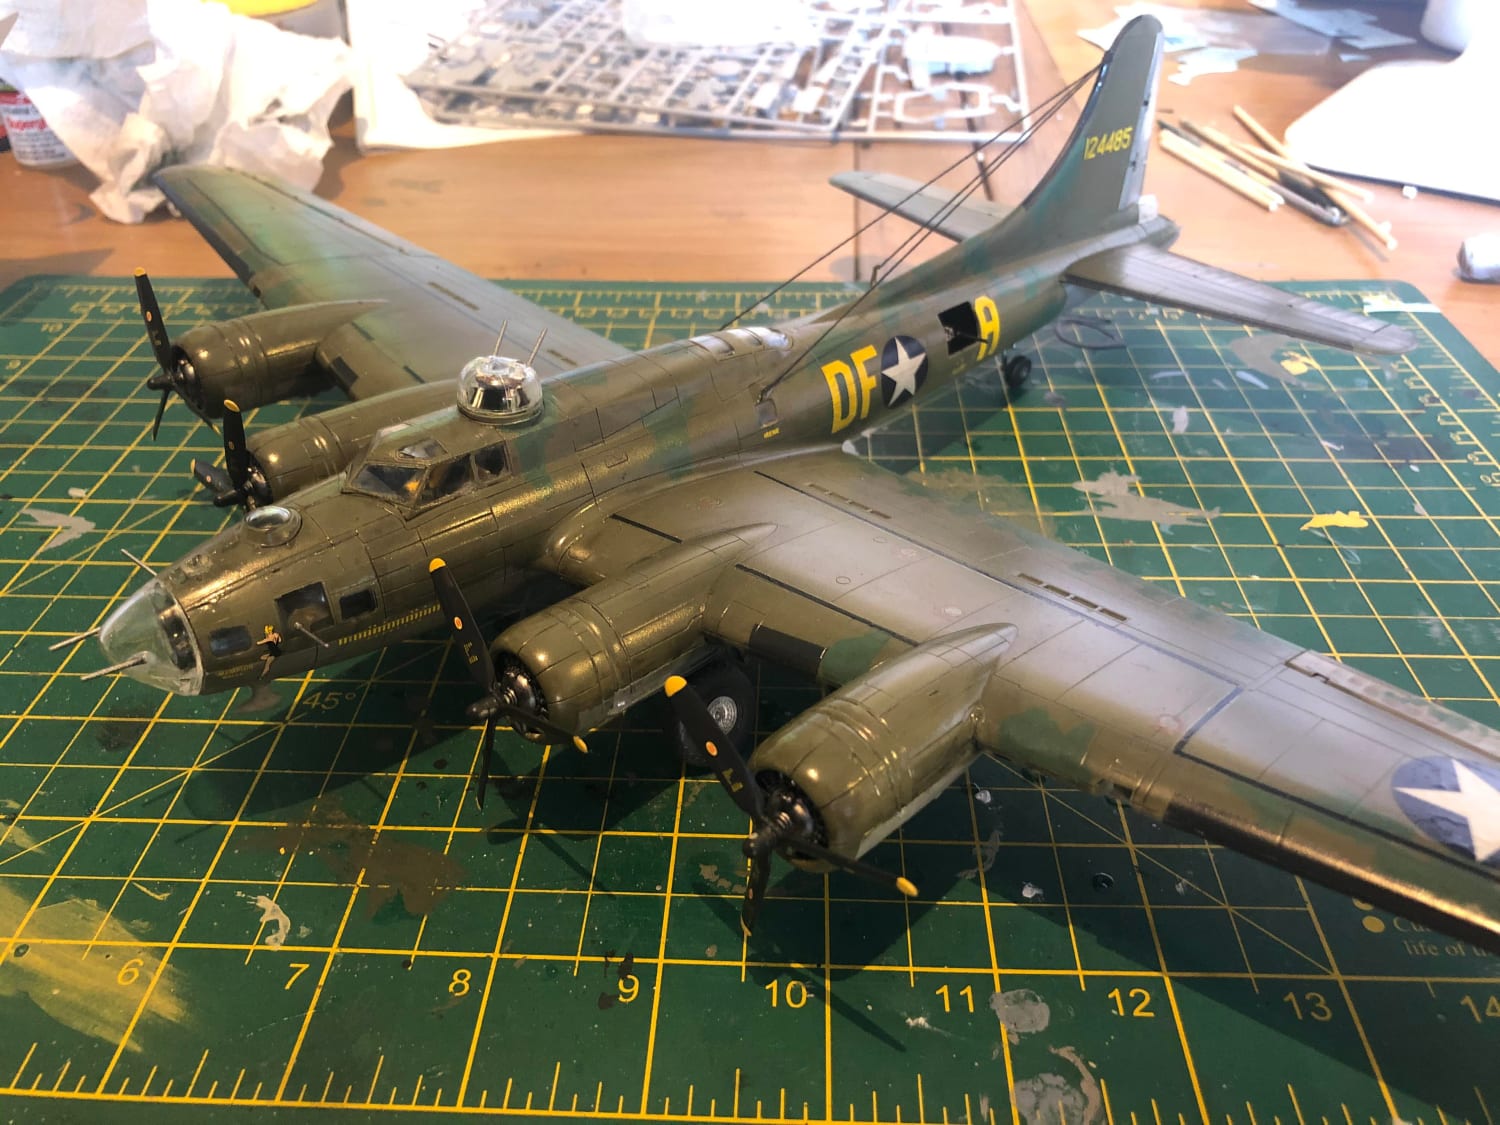 Memphis Belle. 1:72. Best part is panting! Hate the little parts you have to fiddle with at the end!